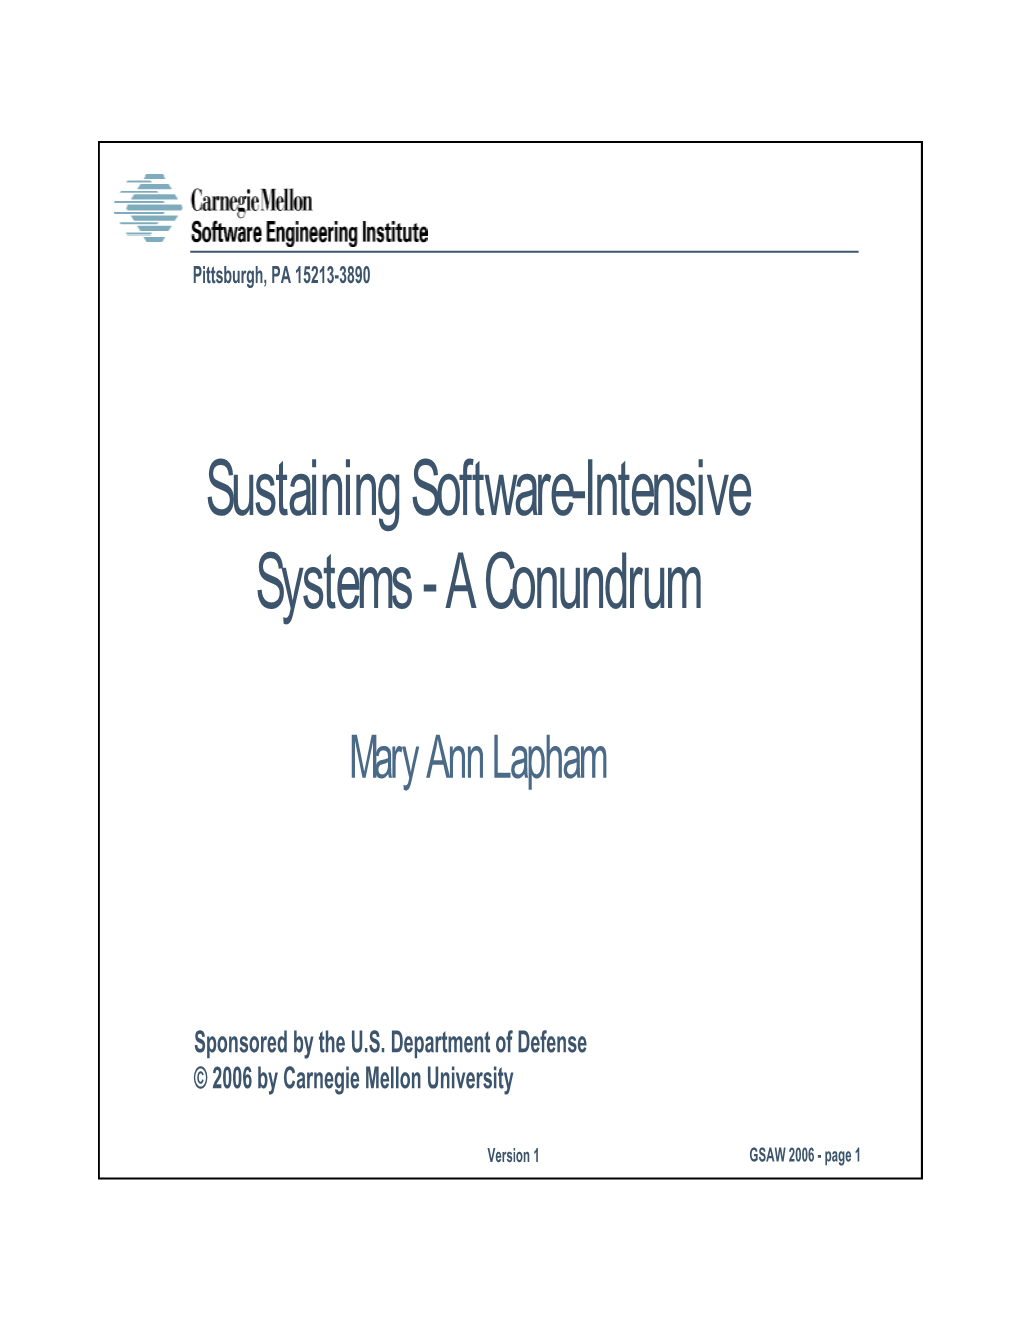 Sustaining Software-Intensive Systems - a Conundrum